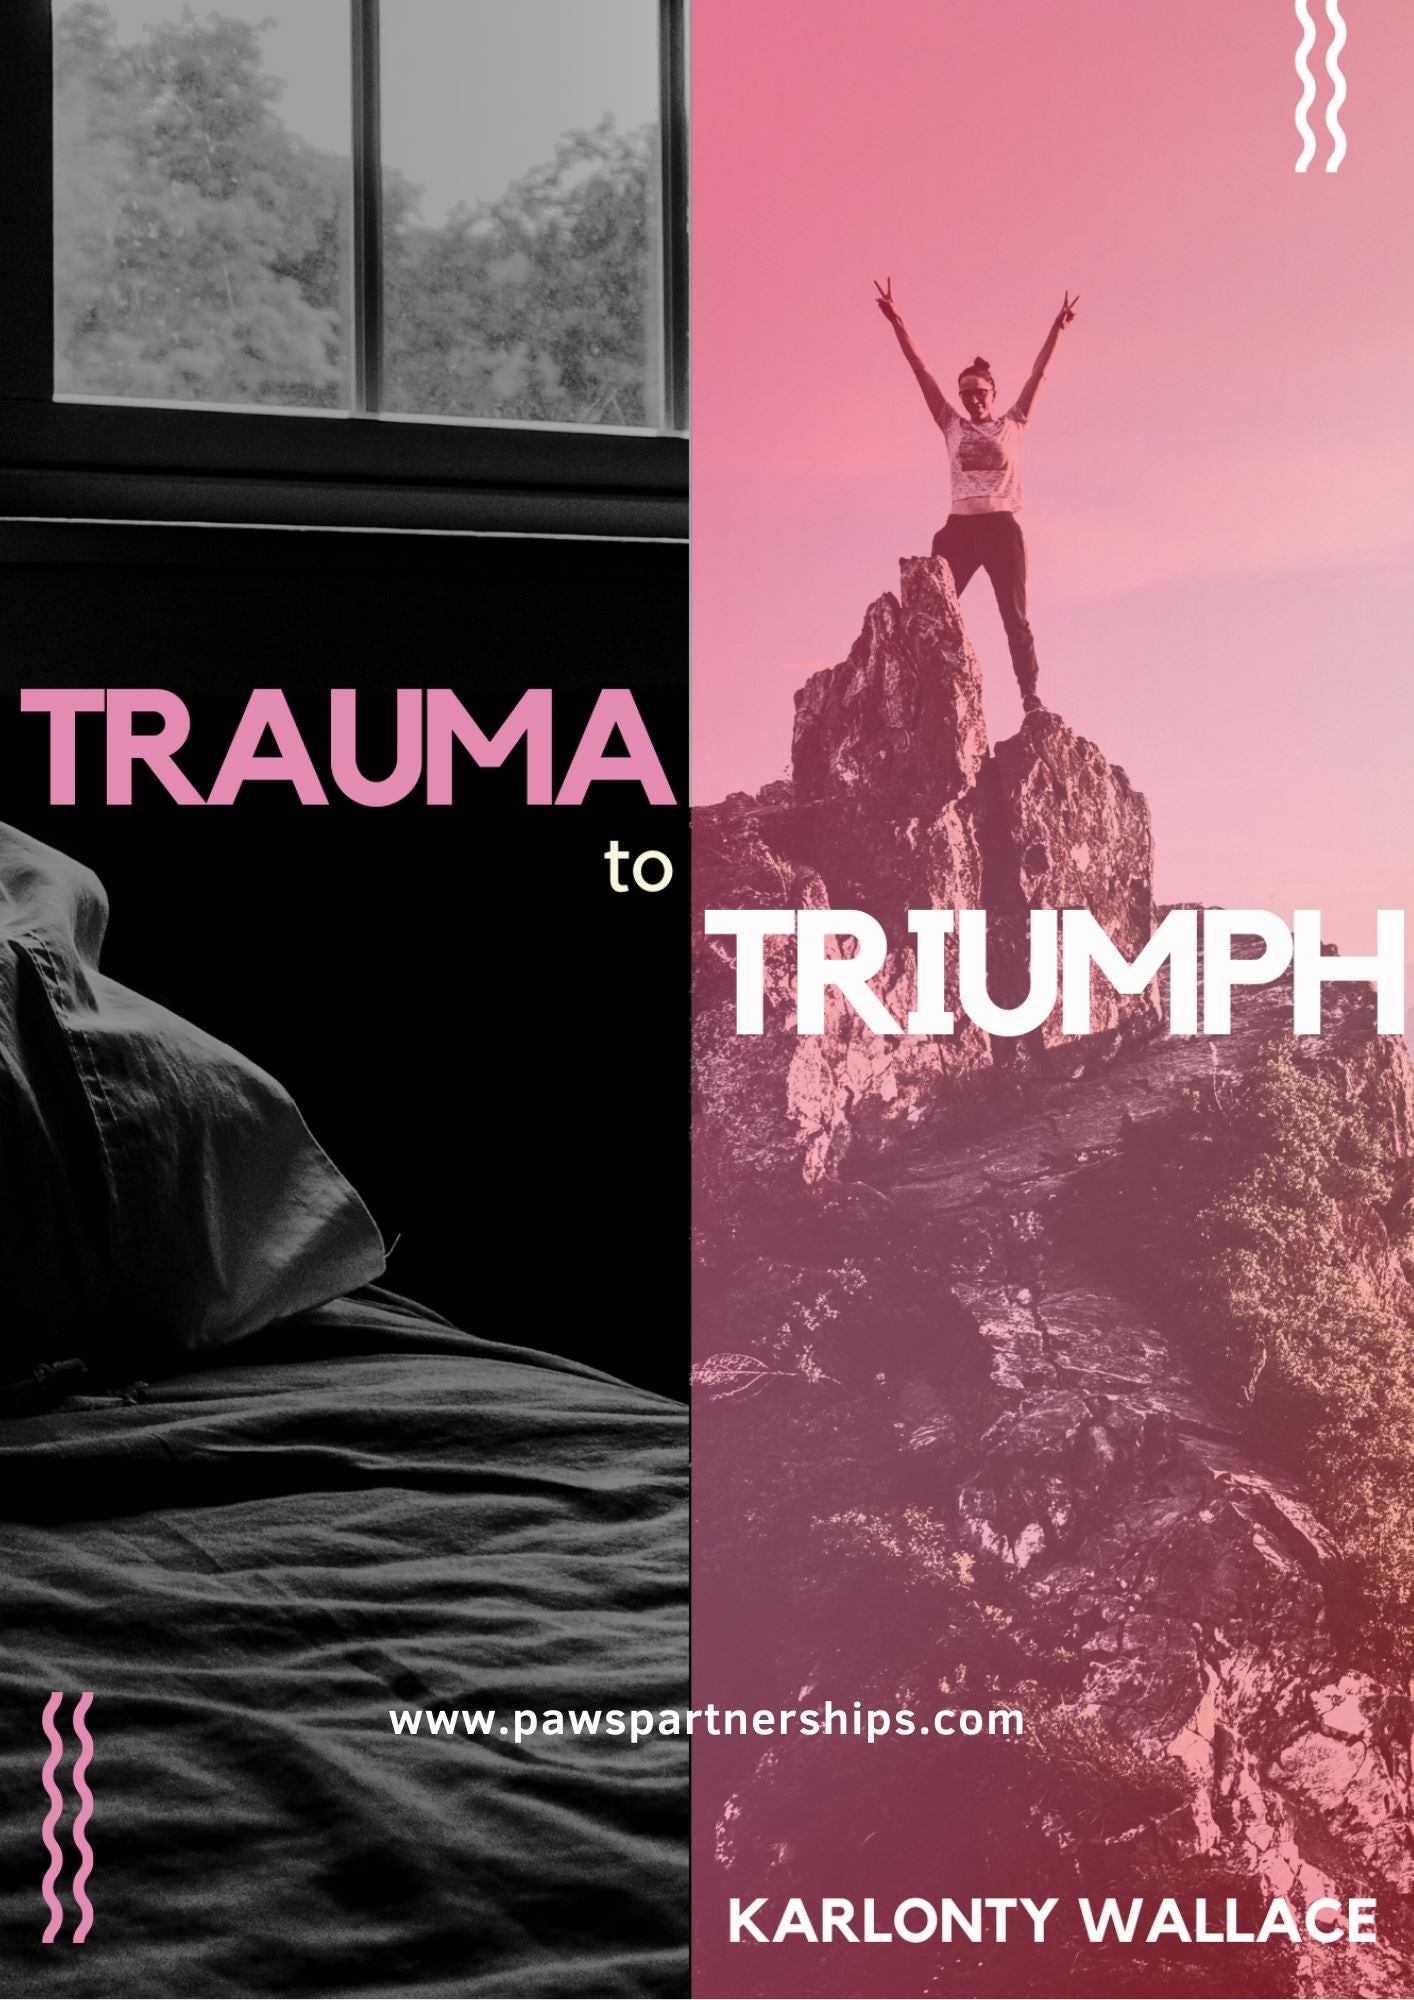 Trauma to Triumph offers the tools to help you on your journey. From a healing roadmap to journaling activities that foster growth, this program is designed to help you transition from a difficult place to a place of triumph. Start your journey to success today.